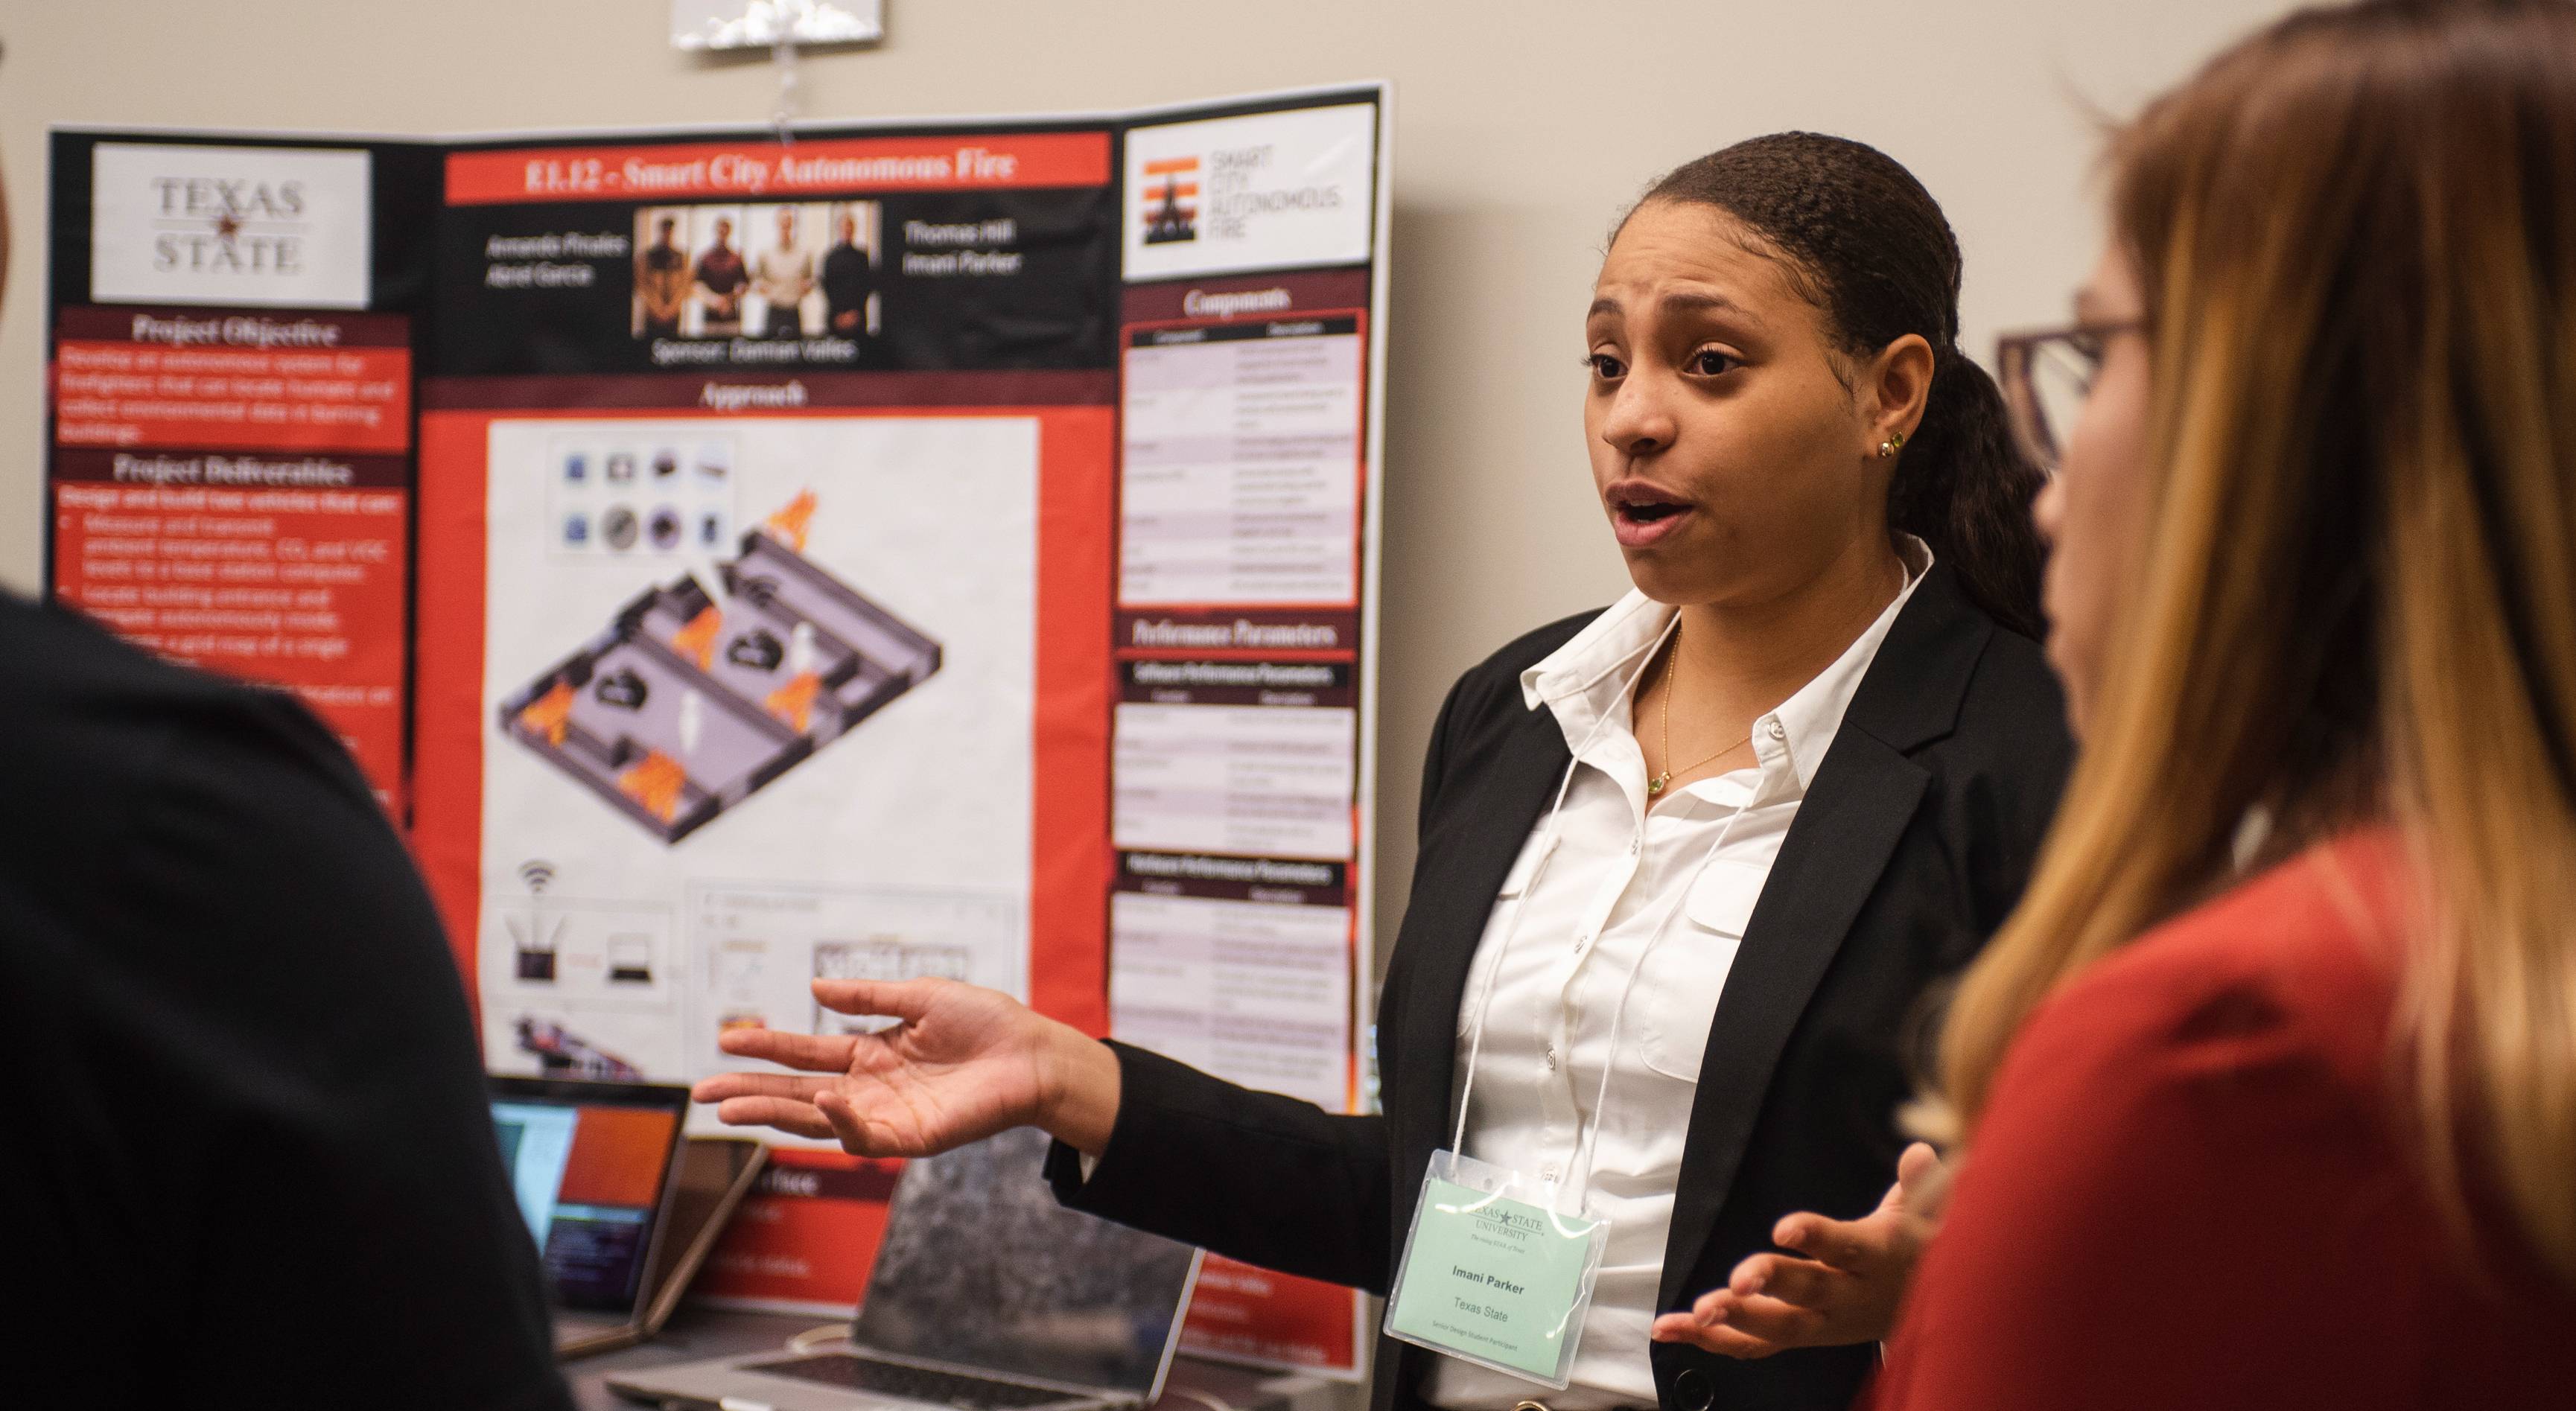 woman presenting research poster